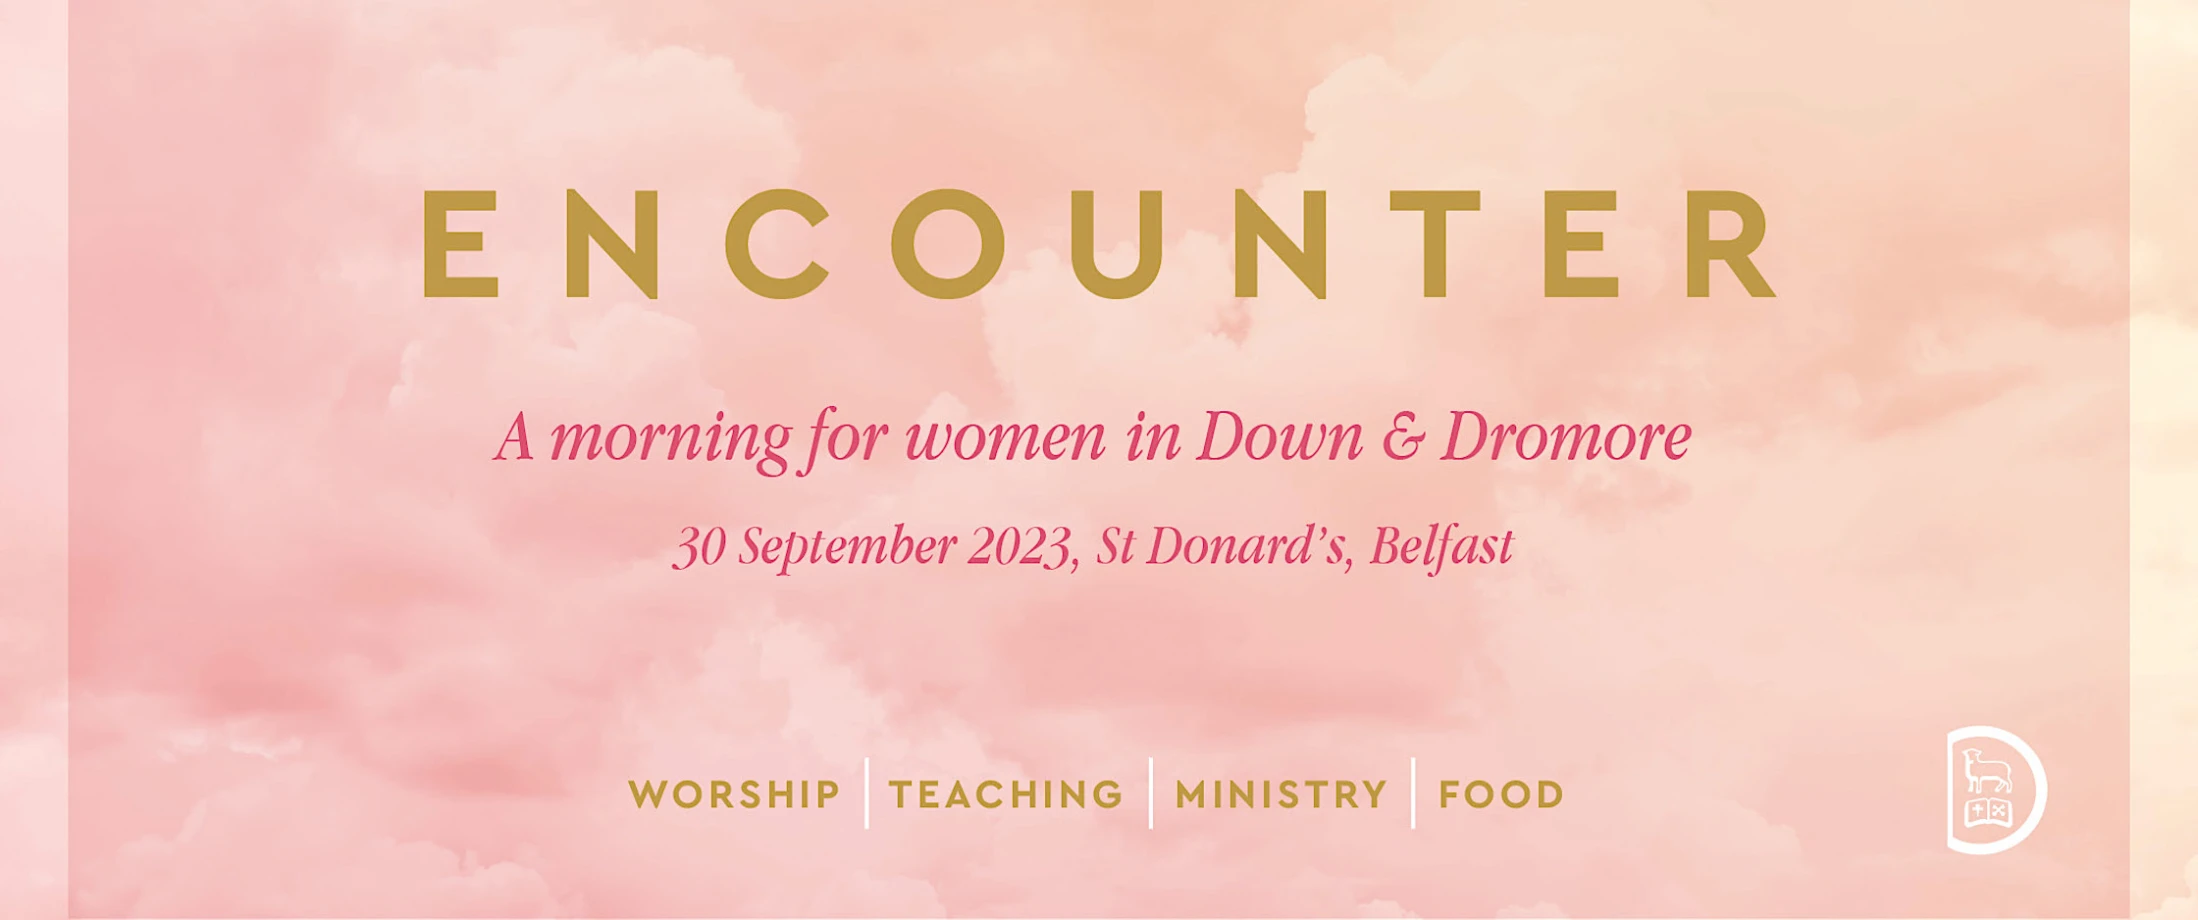 Encounter, a morning for women in Down & Dromore